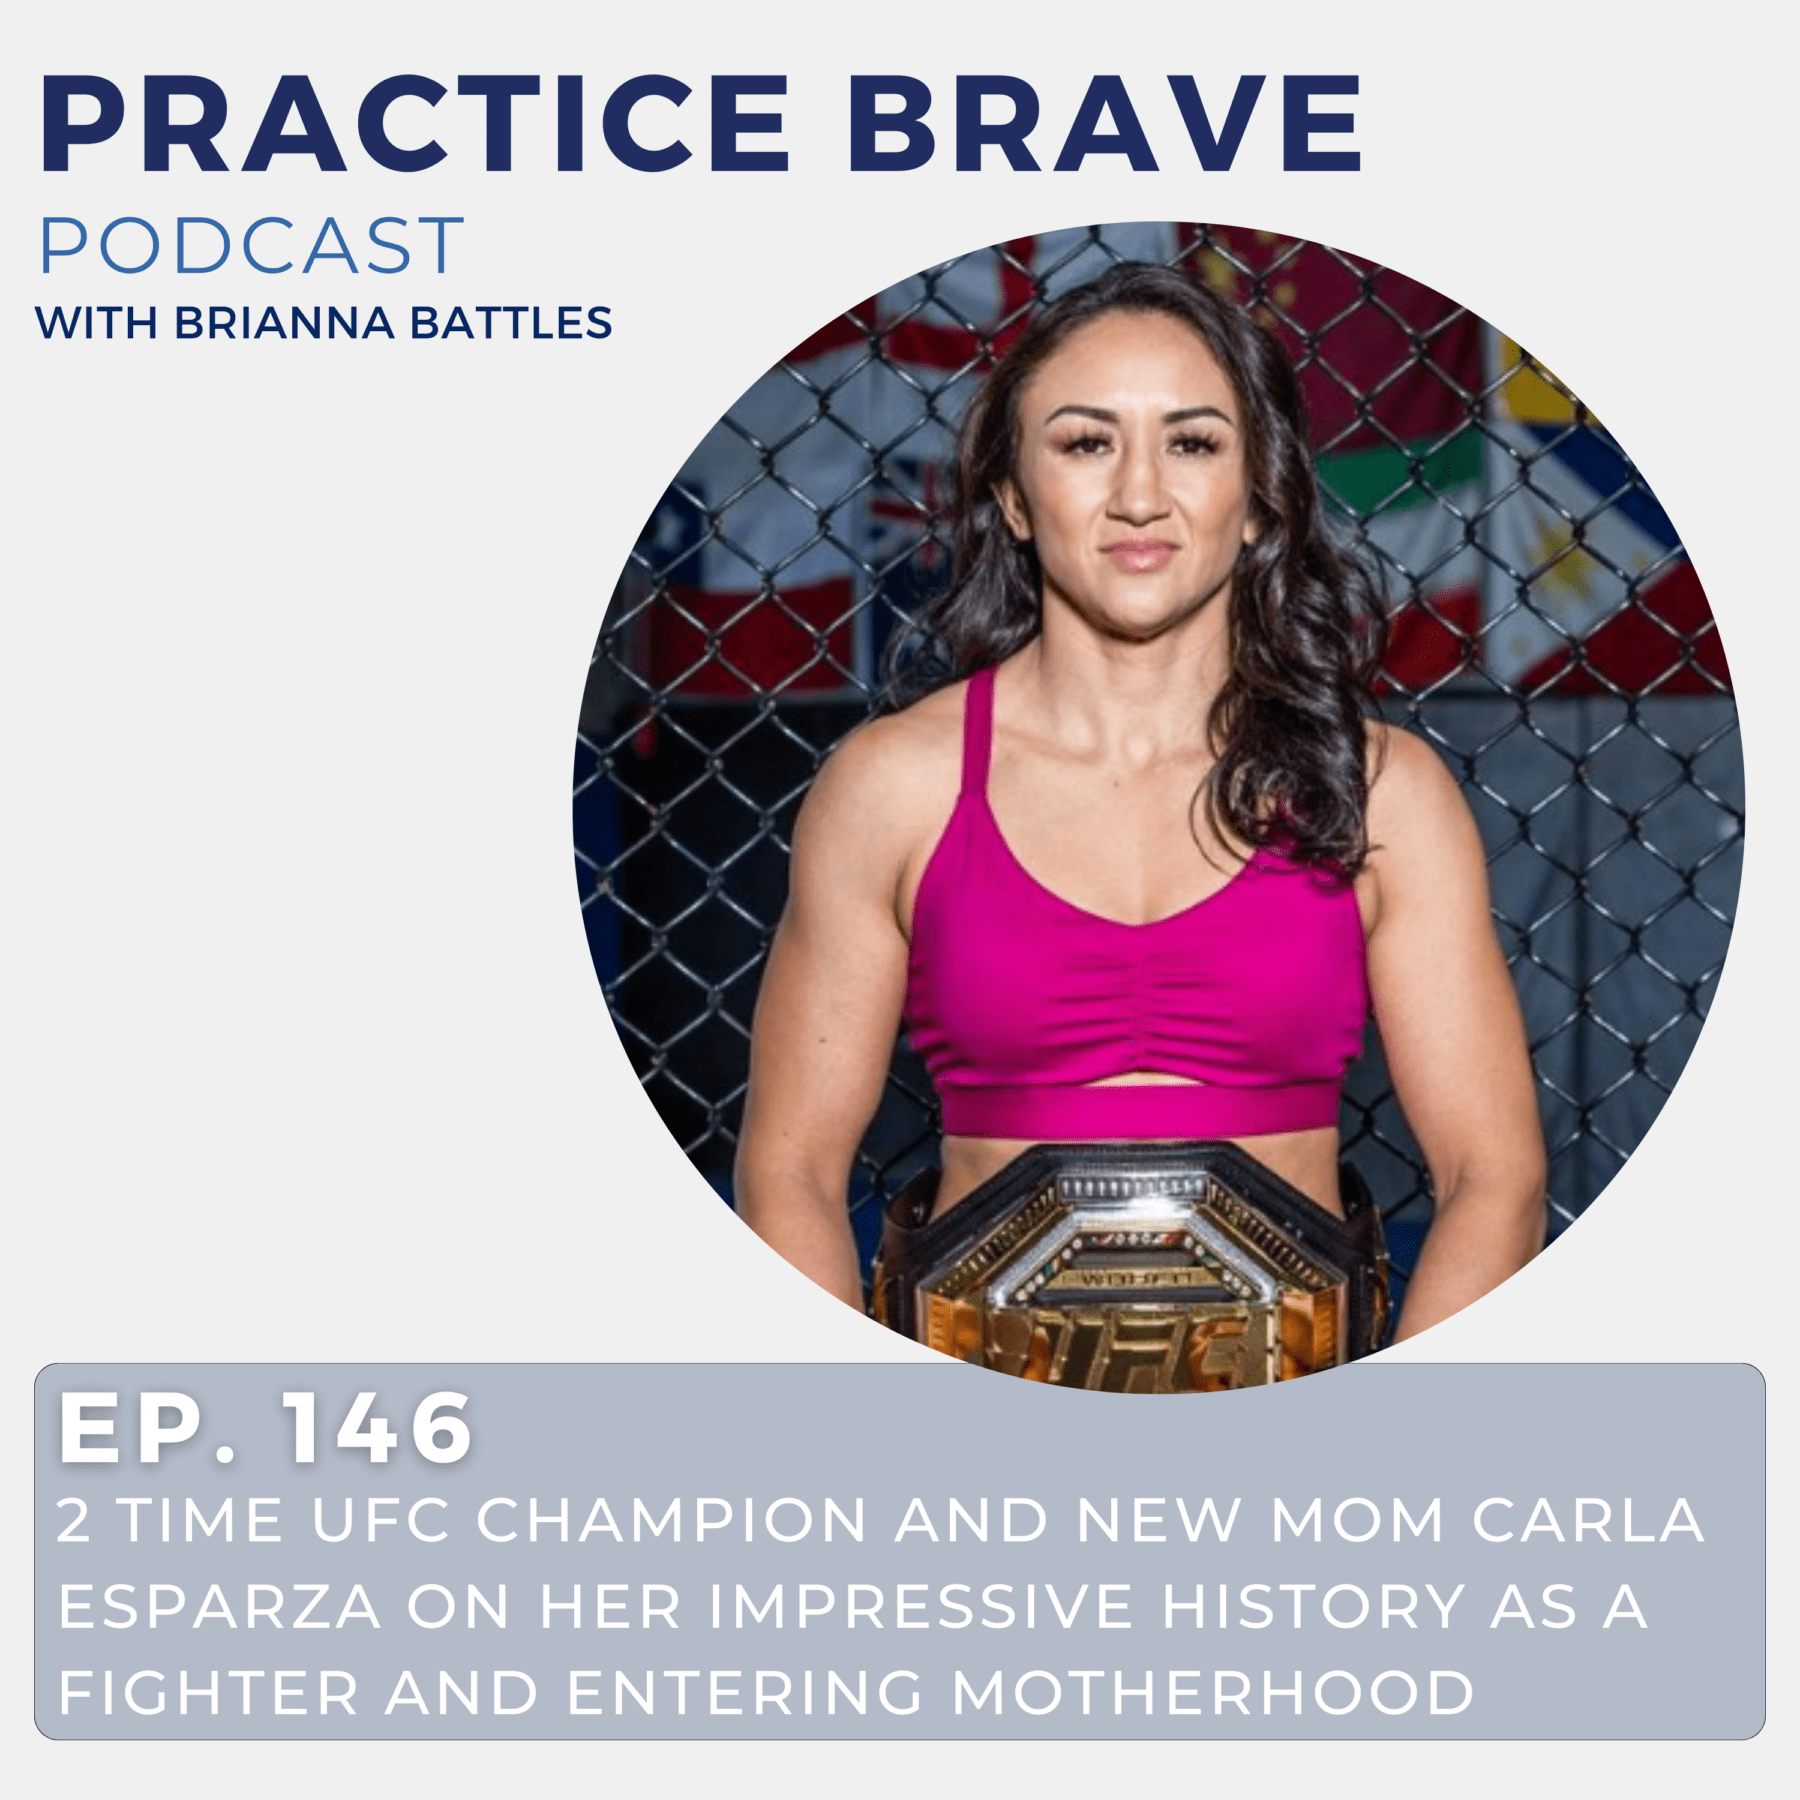 146 - 2 Time UFC Champion and New Mom Carla Esparza on Her Impressive History as a Fighter and Entering Motherhood - Practice Brave with Brianna Battles